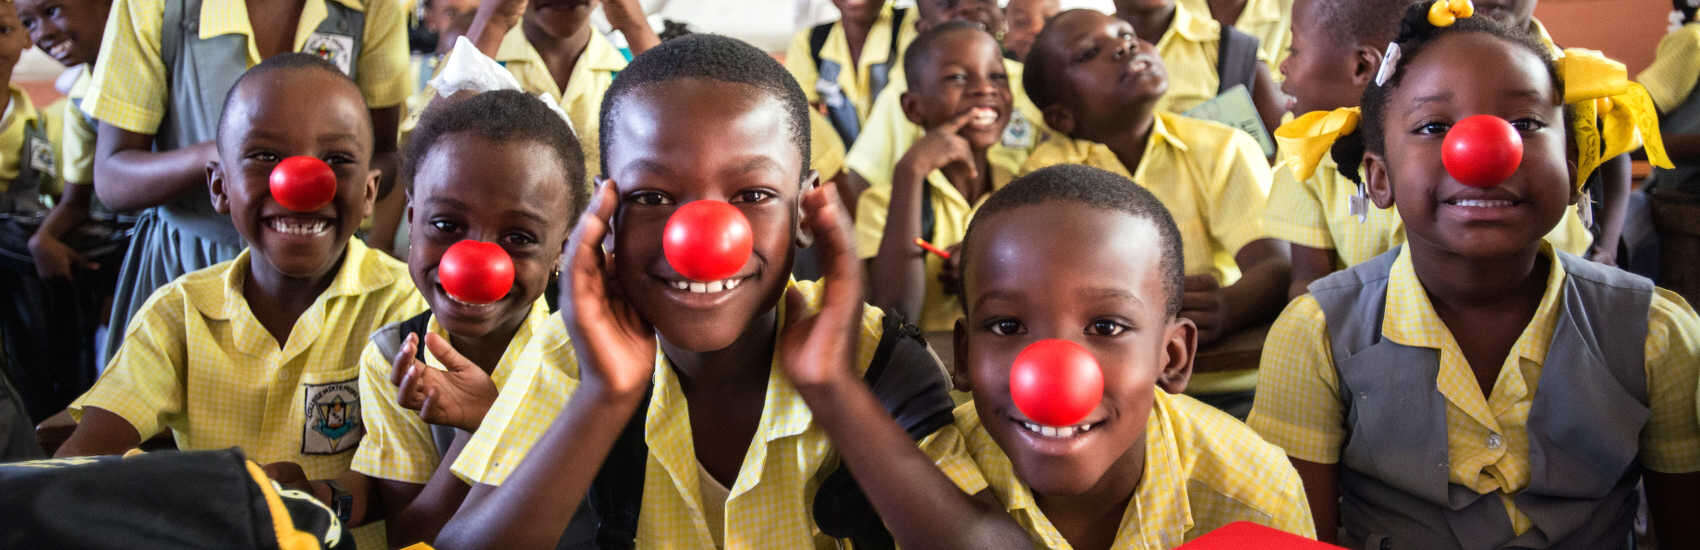 Smiling second-grade students in Haiti put red noses on to celebrate Red Nose Day. This fun fundraising campaign brings people together to raise money and change the lives of kids who need our help the most. We reached more than 15,000 girls and boys in need in urban Port-au-Prince, Haiti, working with teachers, parents and community leaders to improve the quality of education the children receive. Photo credit: Susan Warner/Save the Children, February 2016. 